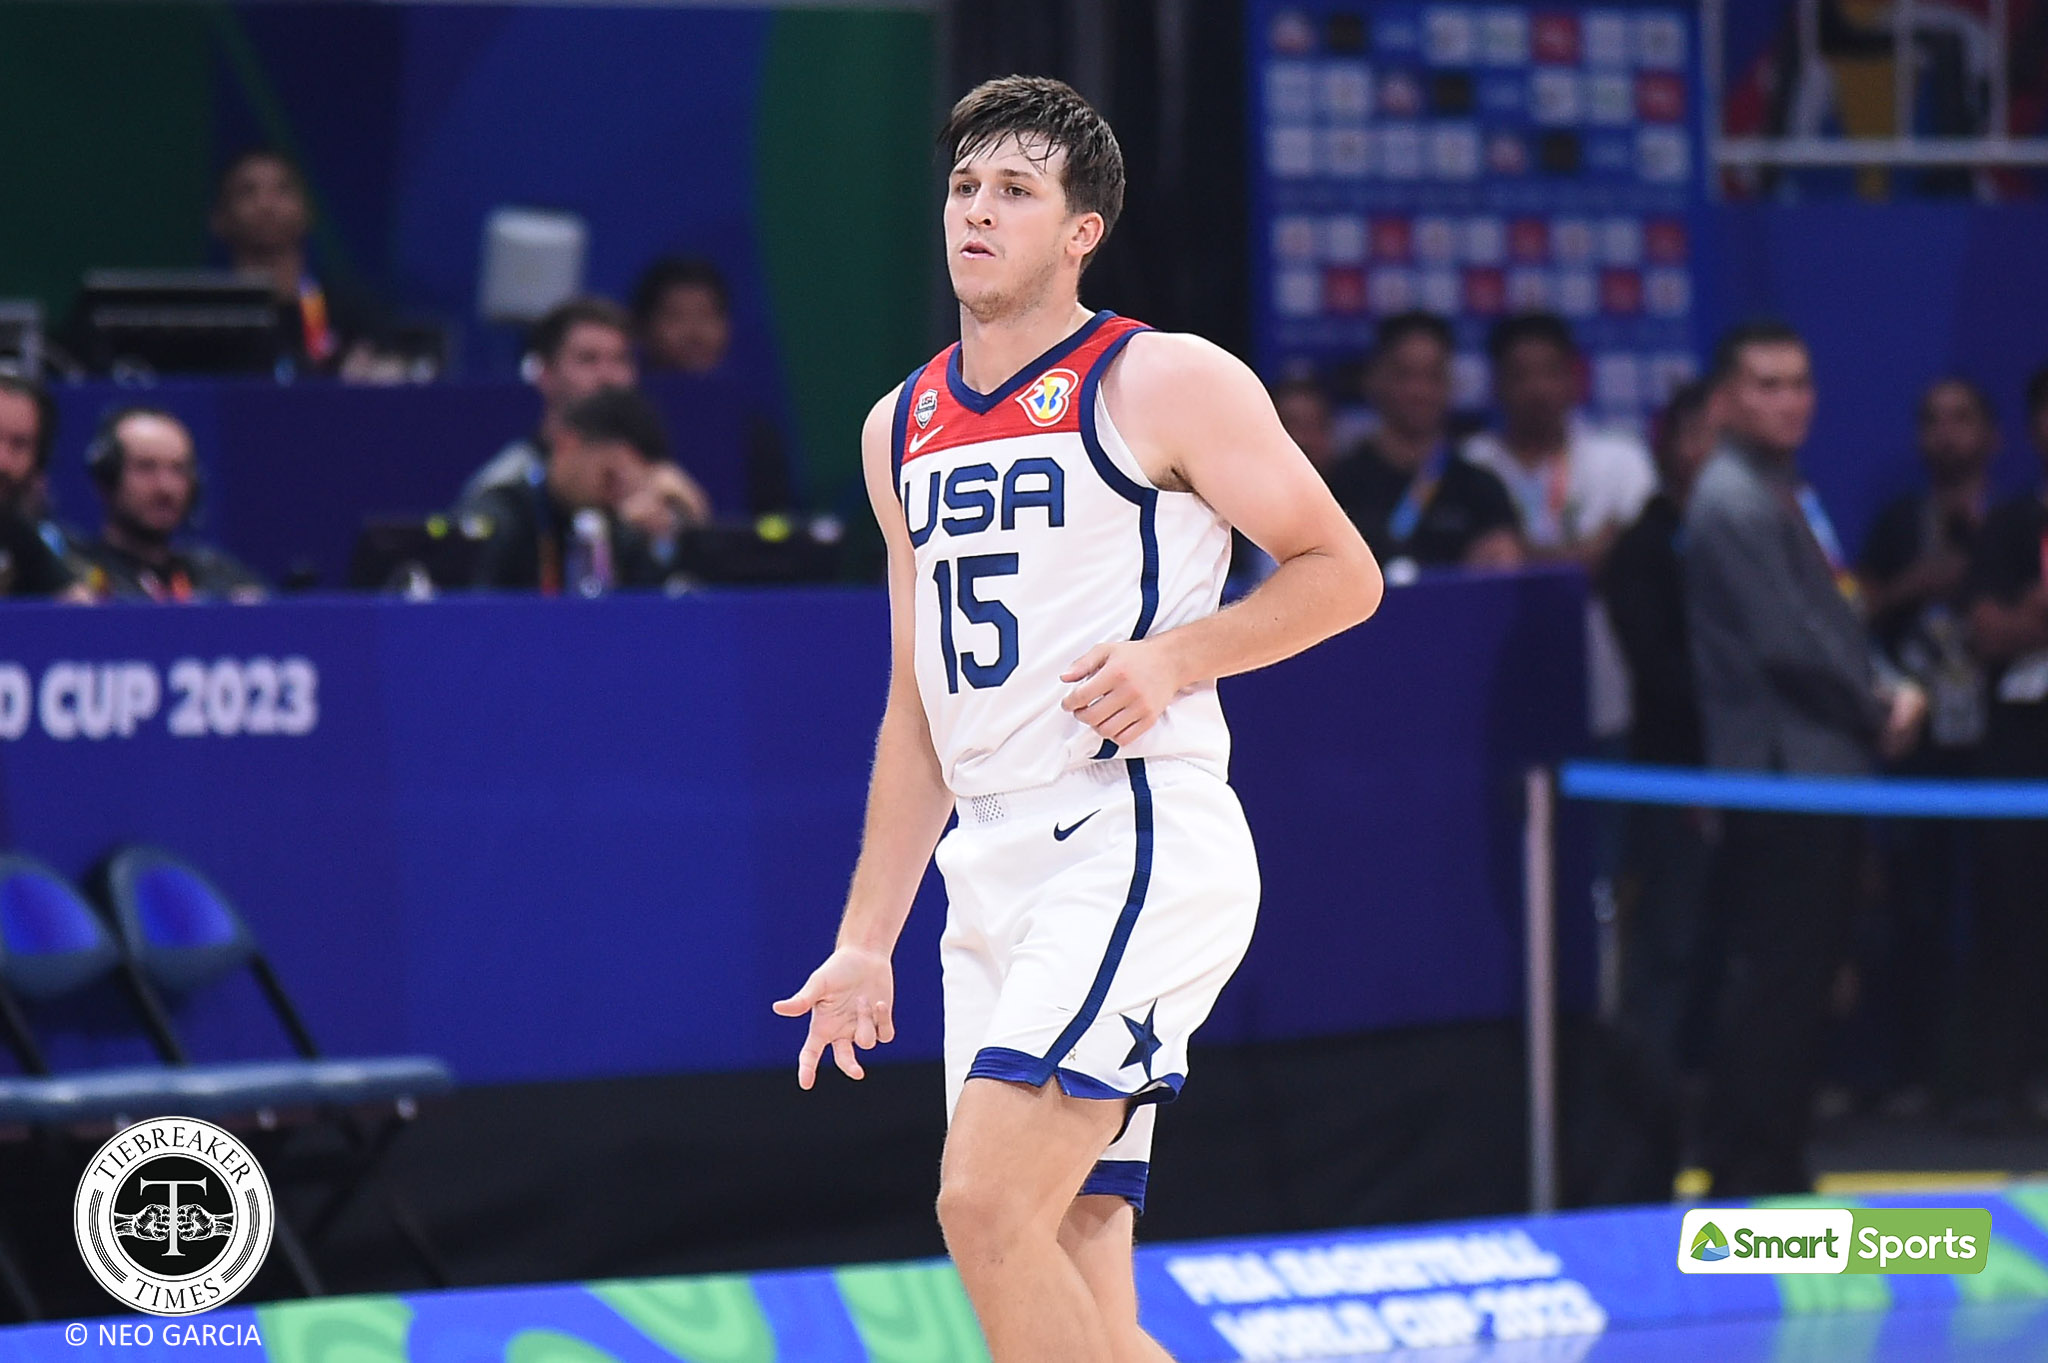 Austin Reaves scores 15, U.S. secures second-round berth in FIBA World Cup  - Los Angeles Times